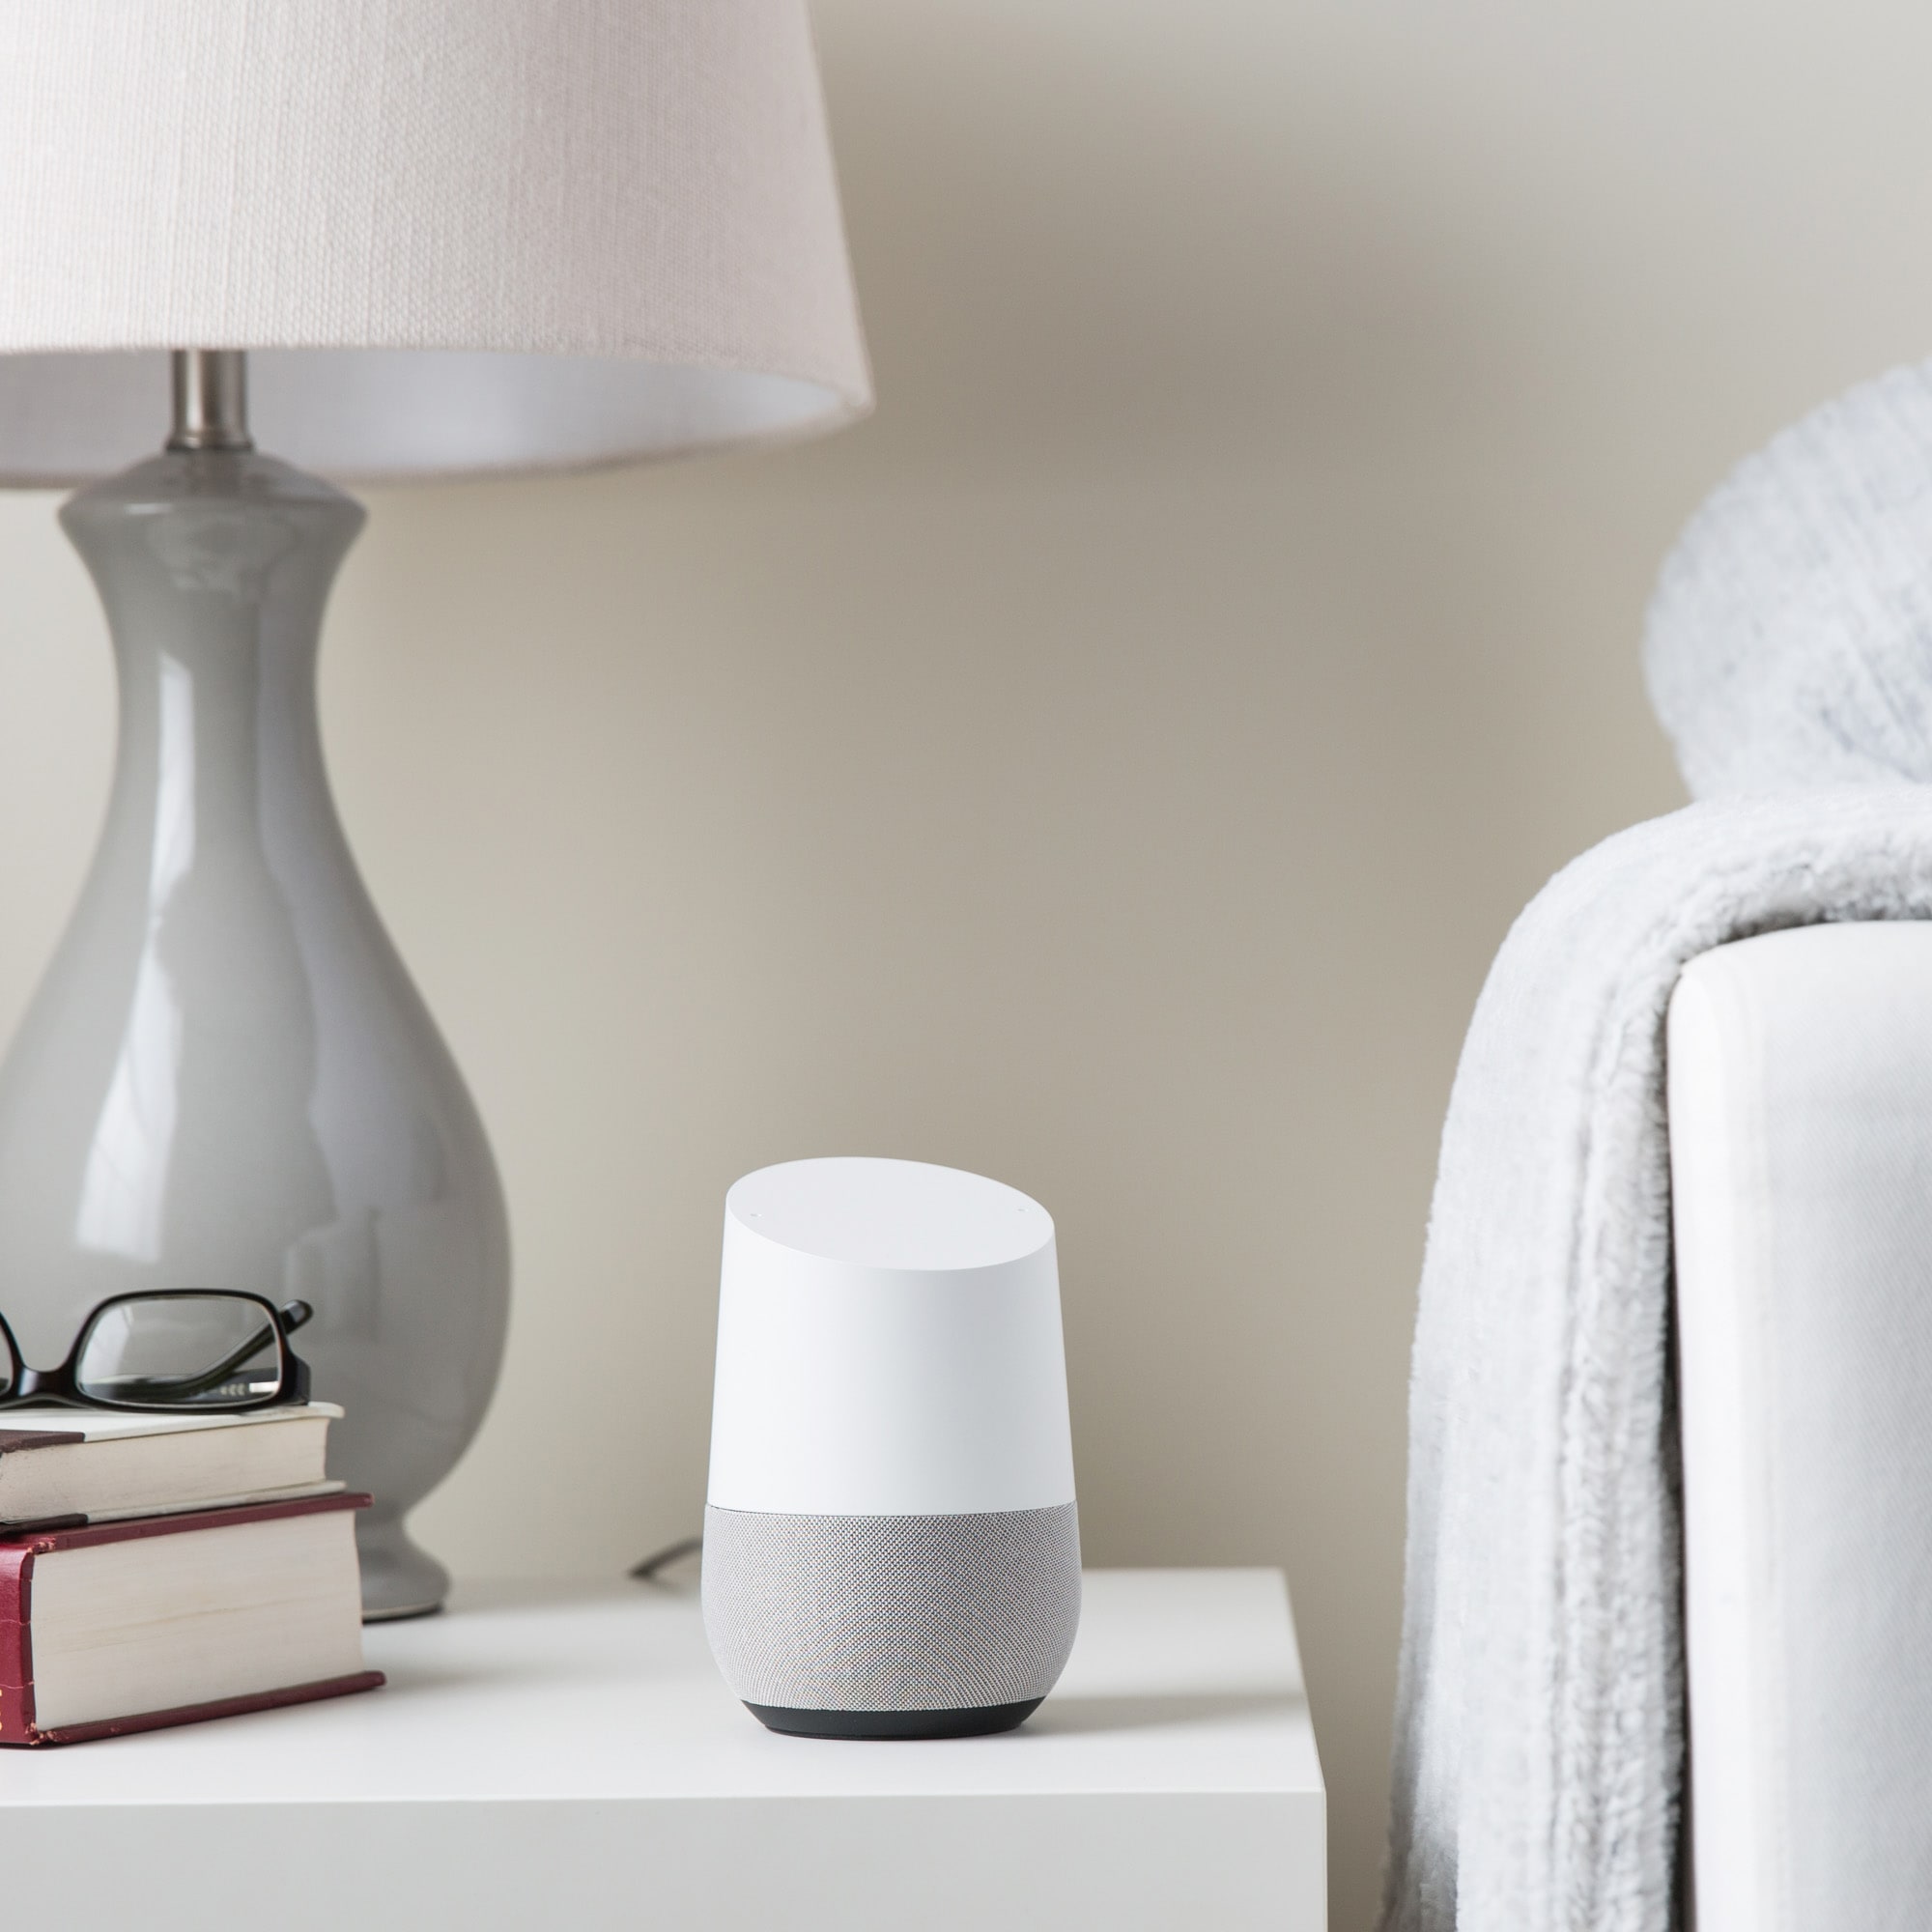 Google Home in the Smart Speakers & Displays department at